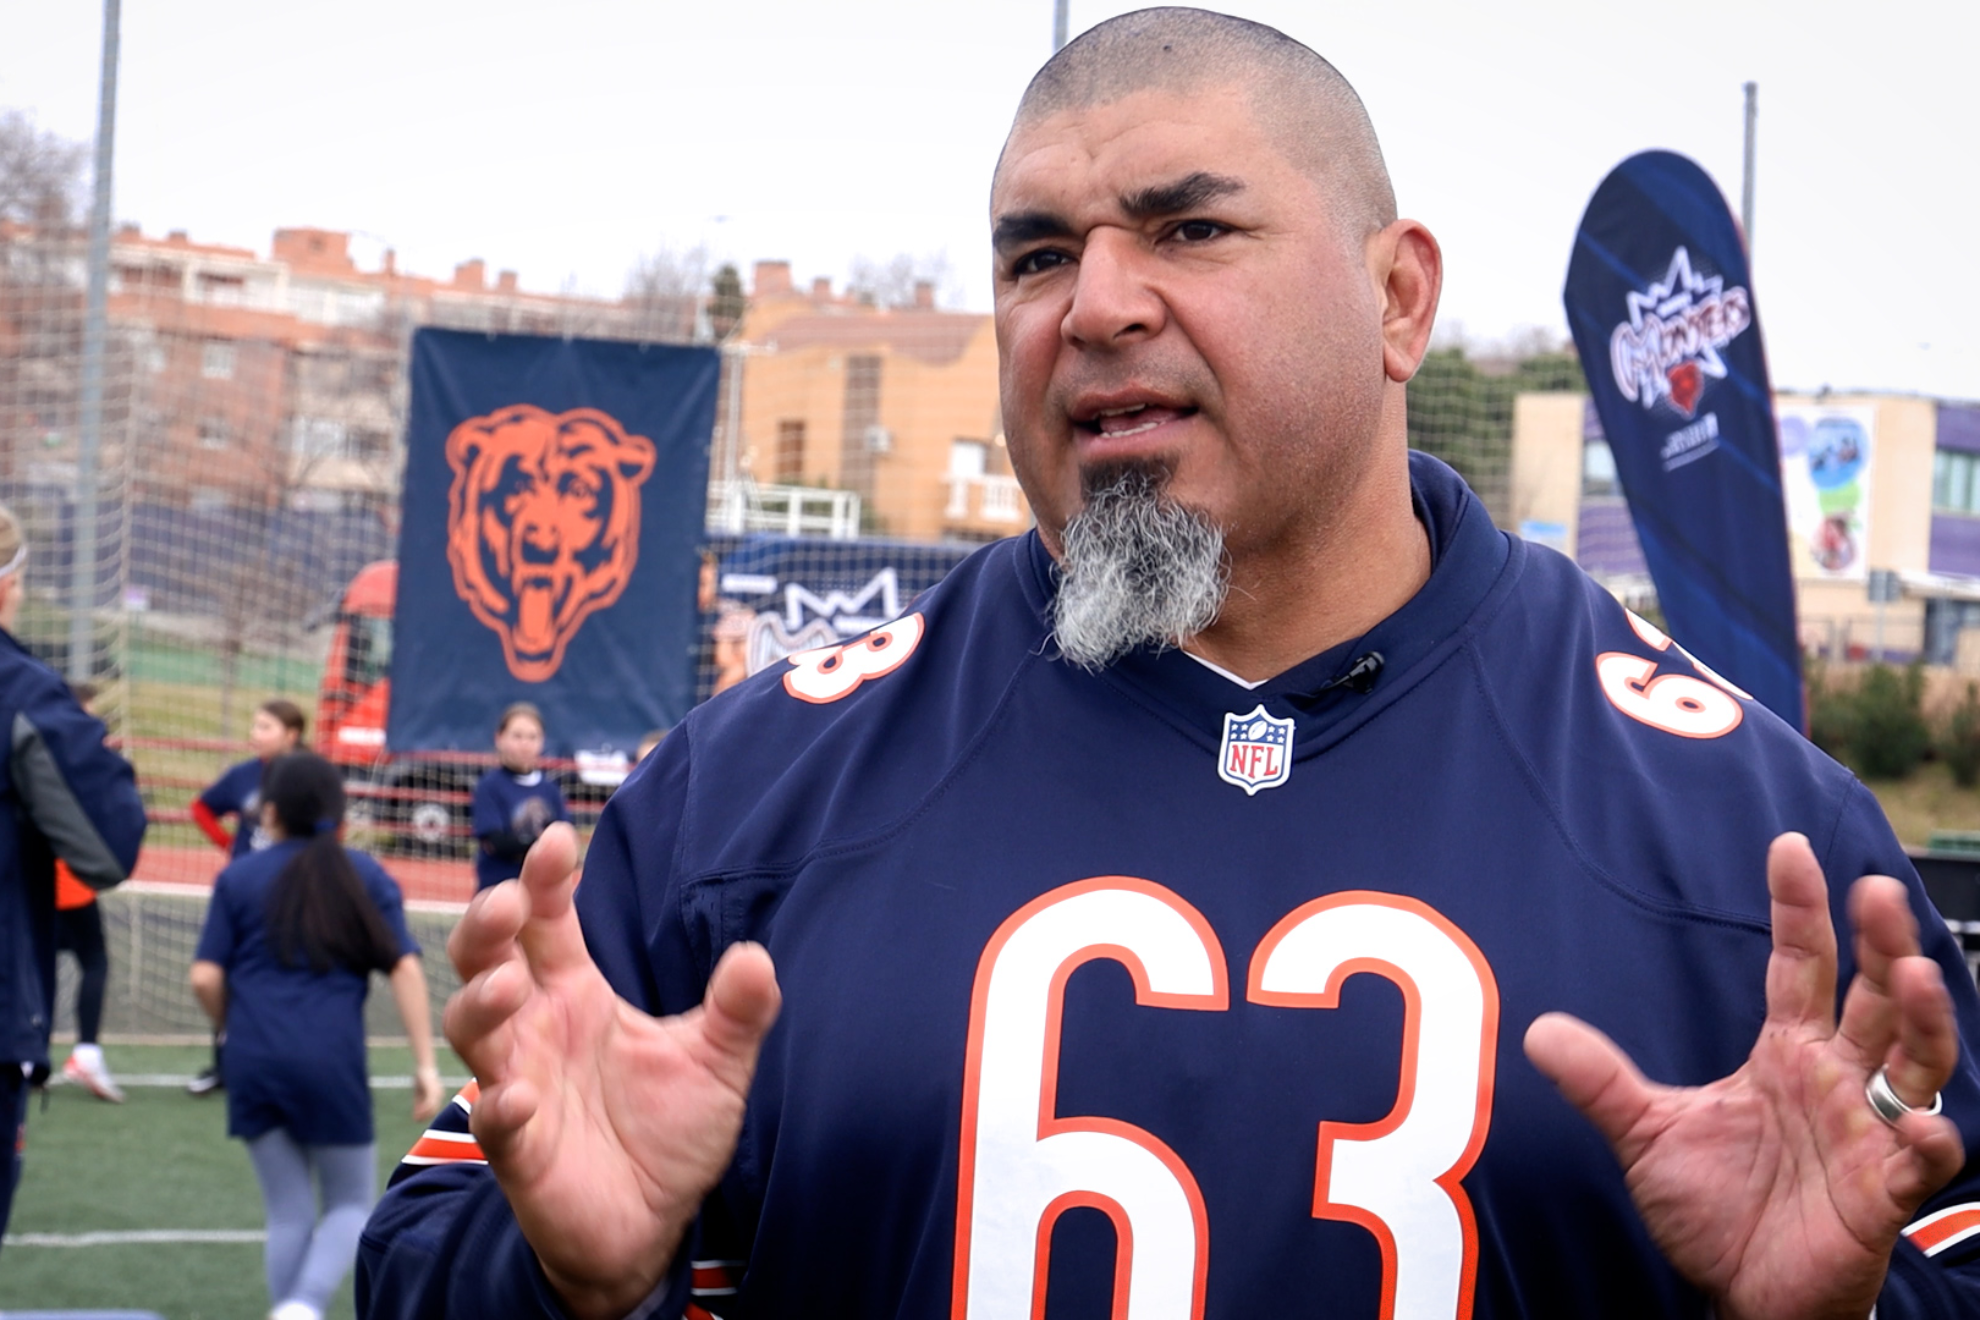 Roberto Garza: Kelce and Mahomes will go down in history, they have already surpassed Brady and Gronkowski